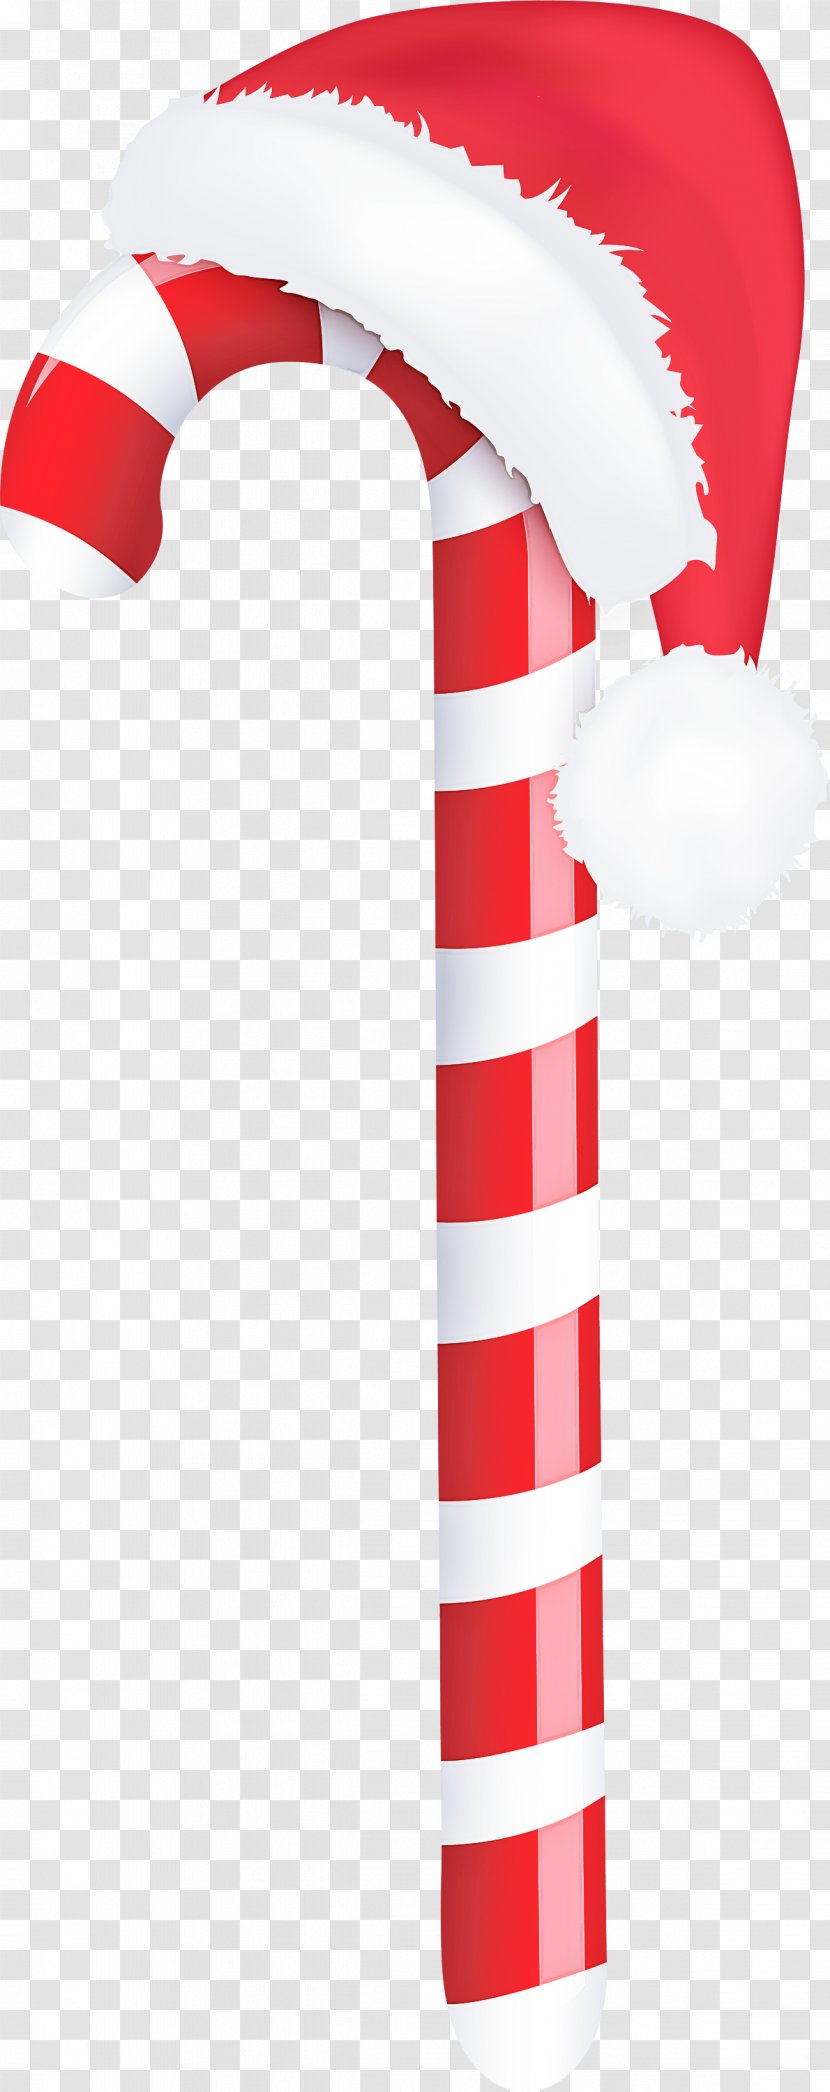 Candy Cane - Confectionery - Flag Transparent PNG